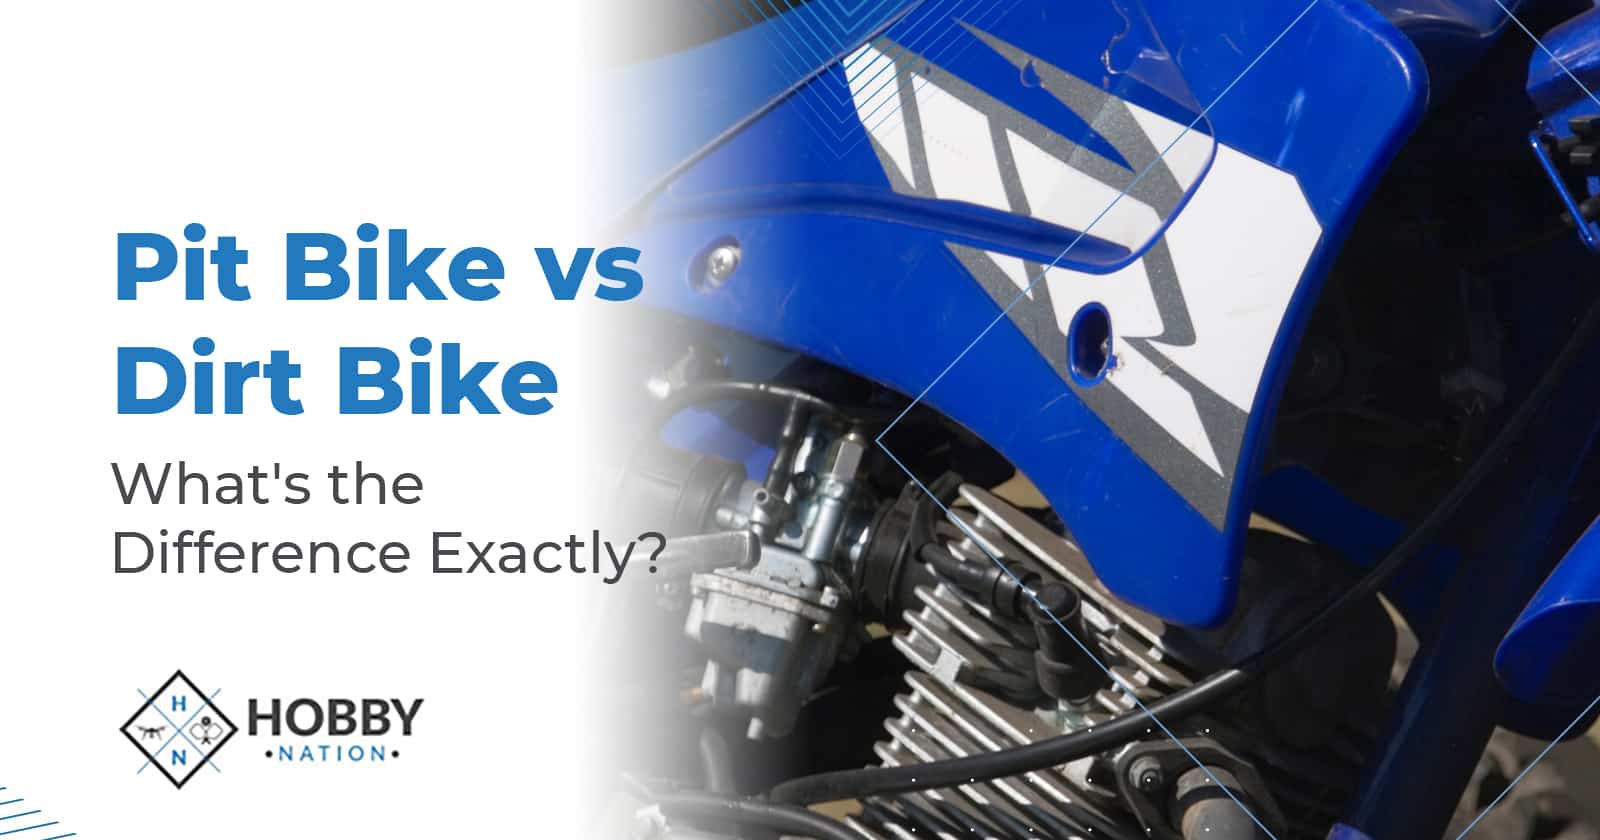 Pit Bike vs Dirt Bike – What’s the Difference Exactly?